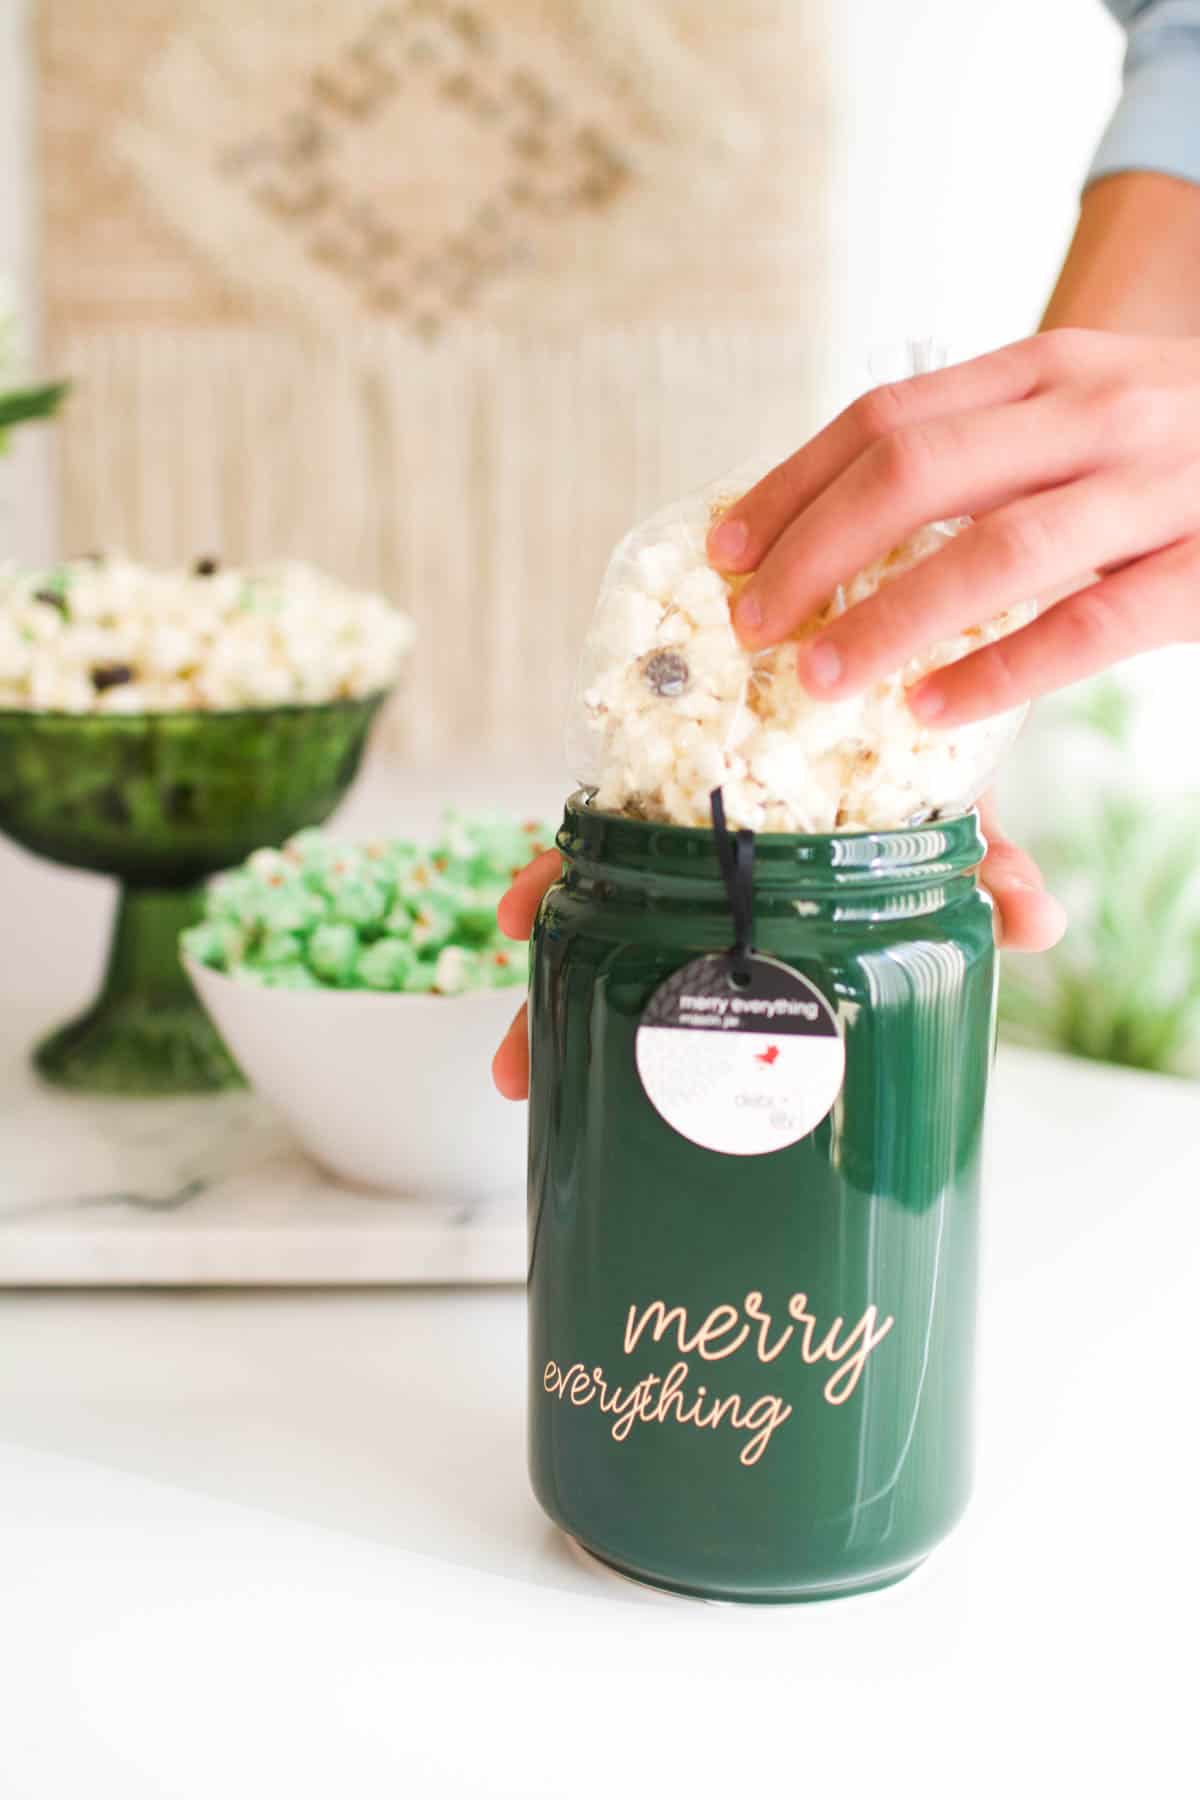 Adding a bag of white chocolate popcorn to a green holiday jar.